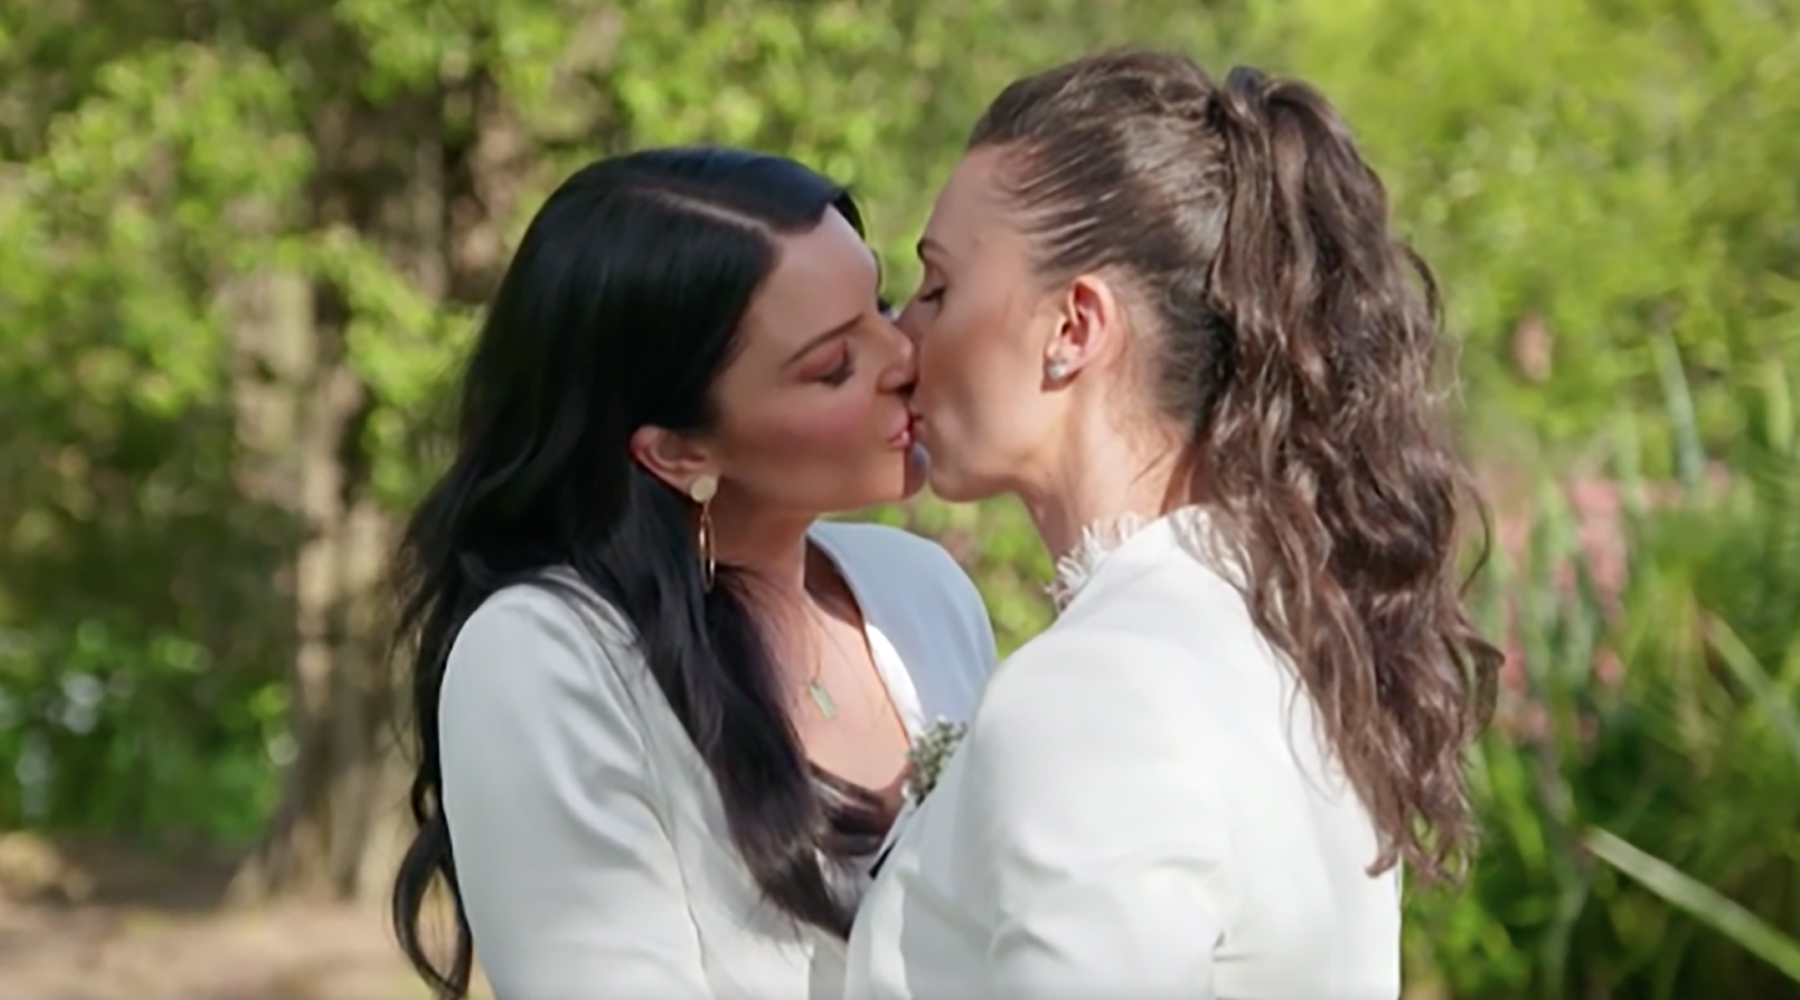 Australia's first lesbian couple to tie the knot on Married At Firs...